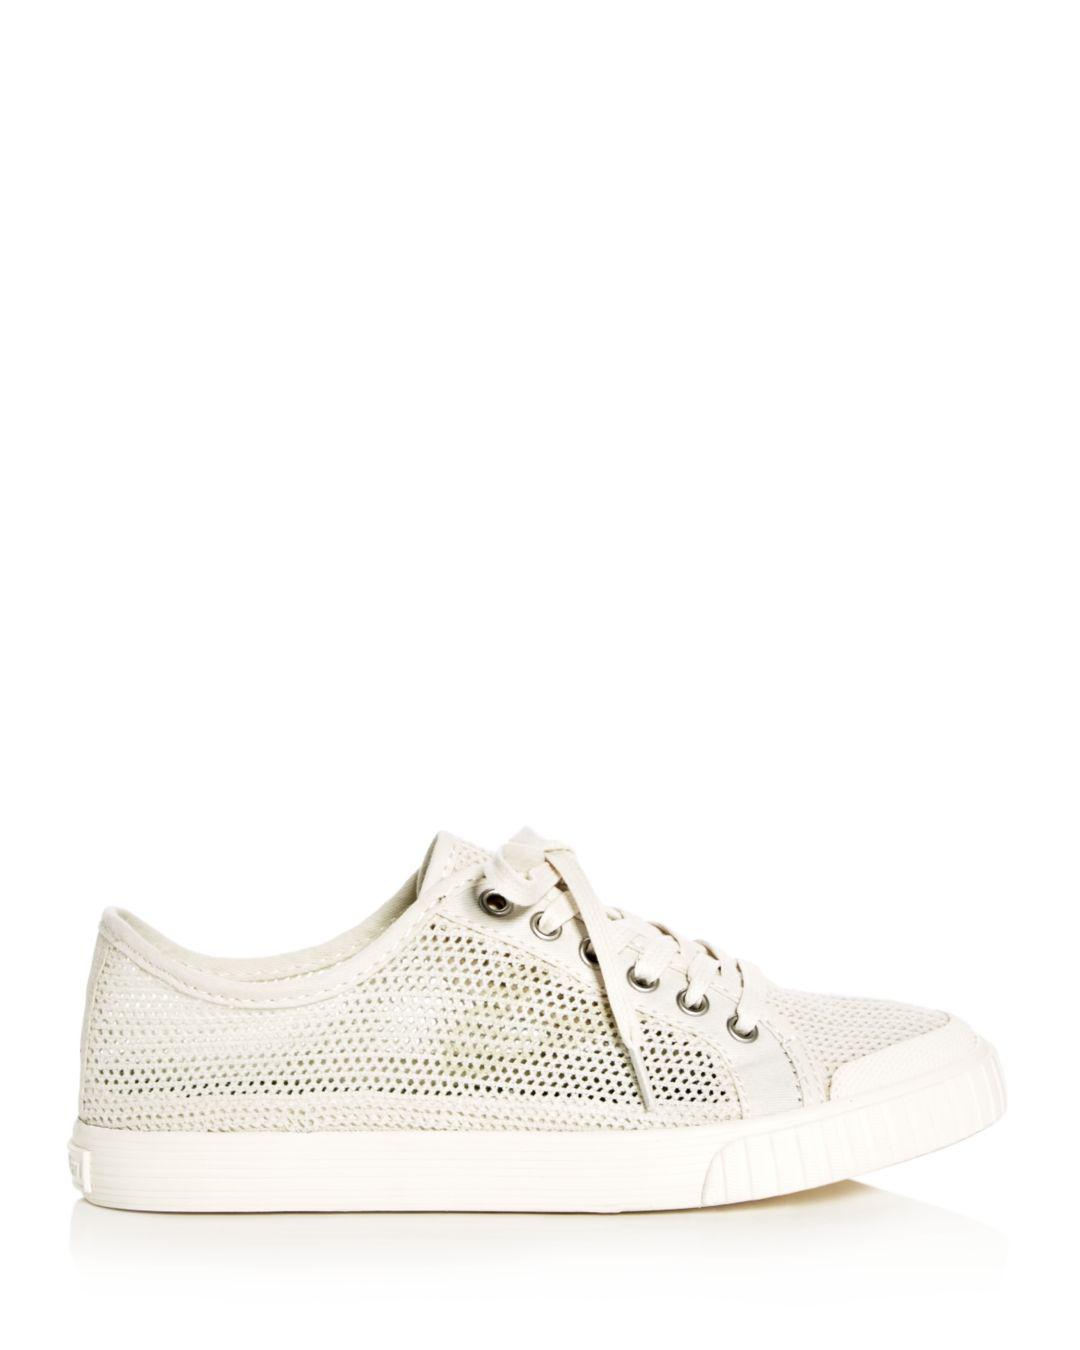 Tretorn Women's Tournet Mesh Lace Up Sneakers in Natural | Lyst